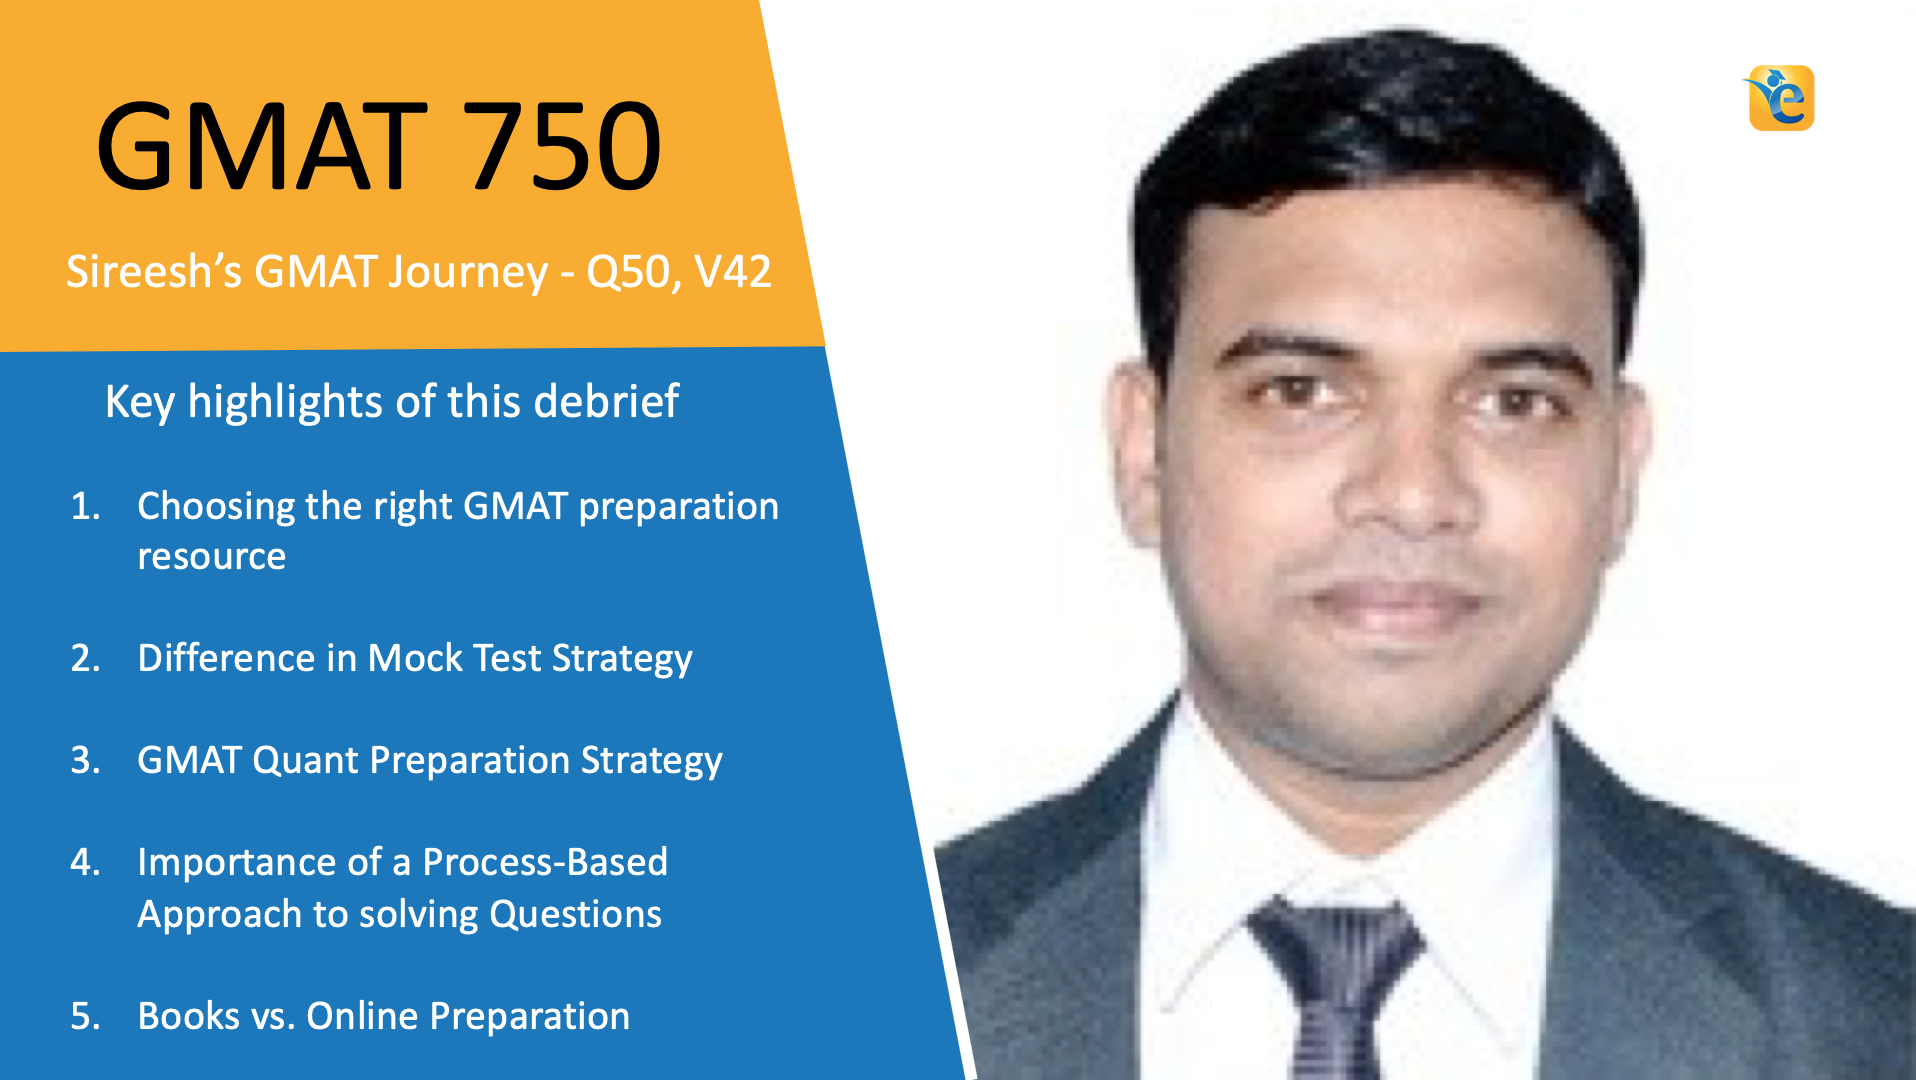 From GMAT 690 to GMAT 750 – Sireesh’s 6 year journey to ace the GMAT